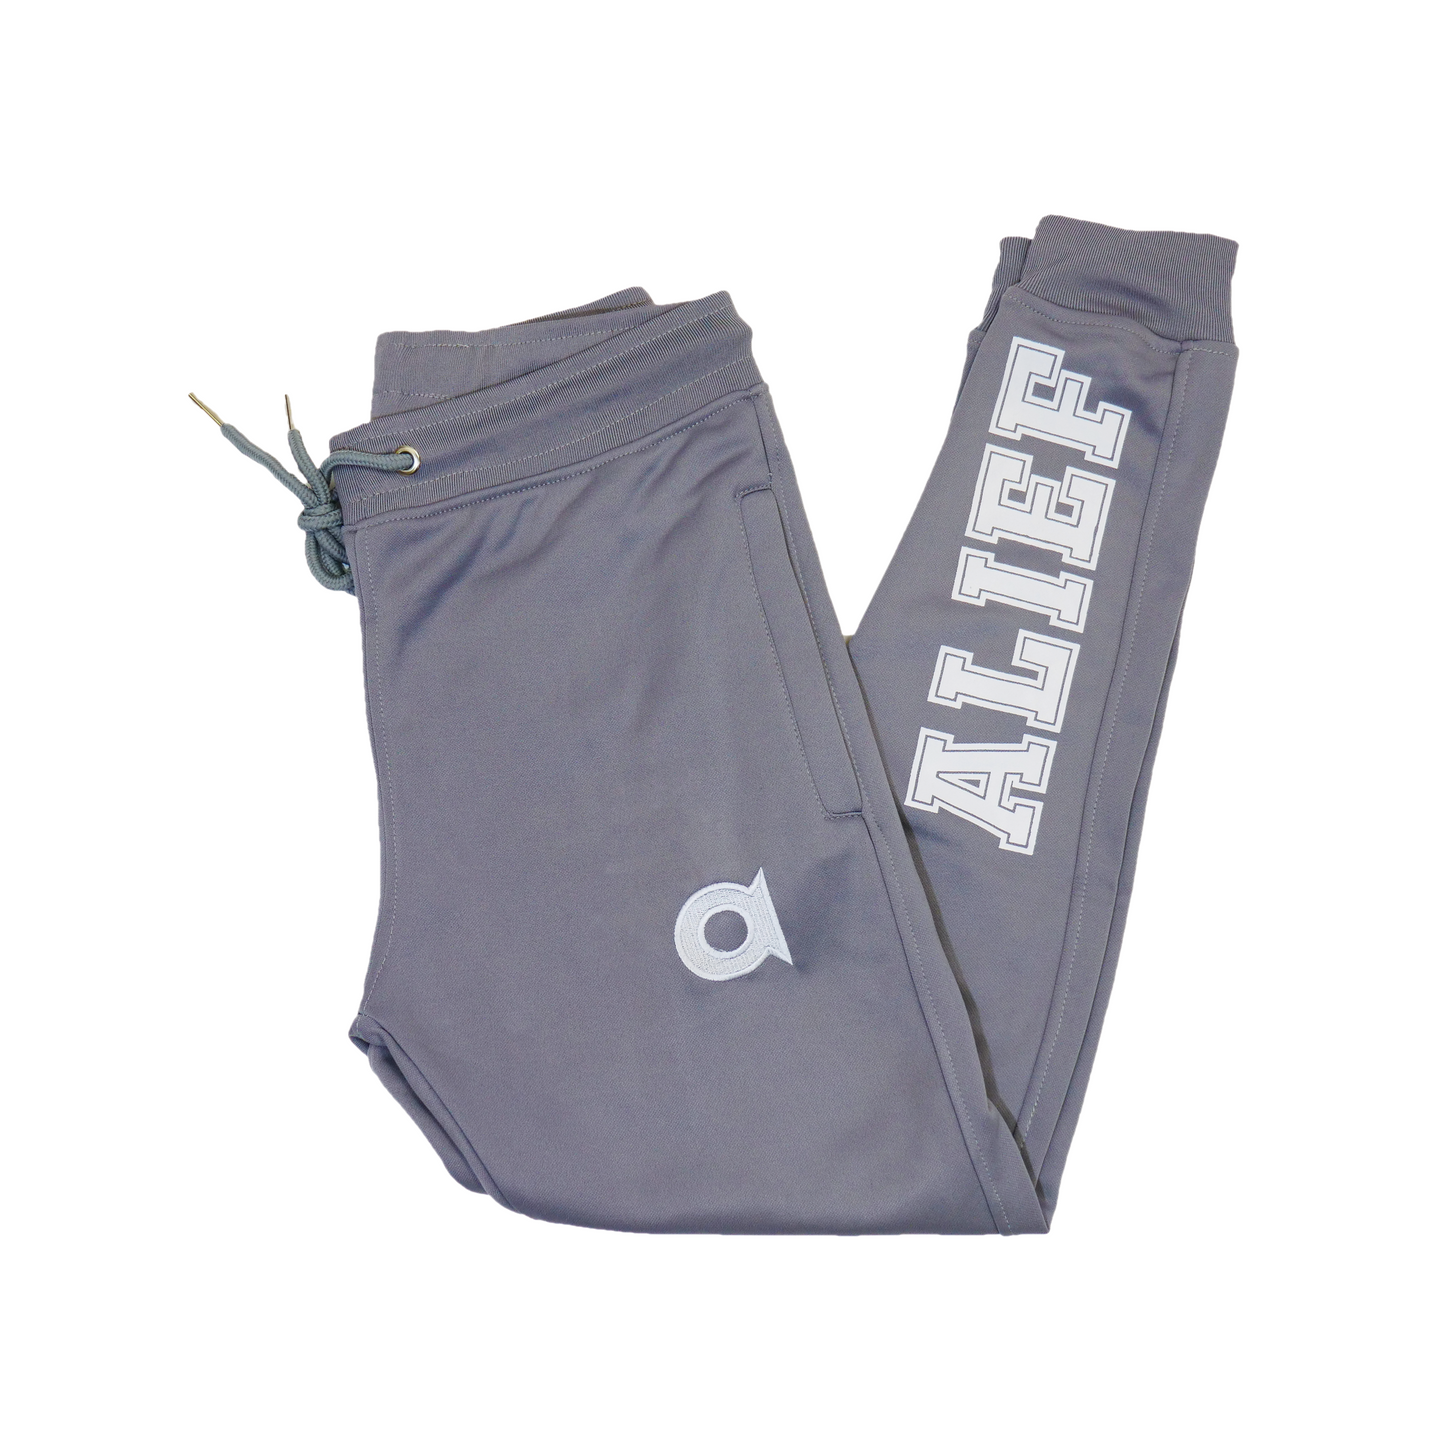 Alief Athletic Jumpsuit - Gray/White